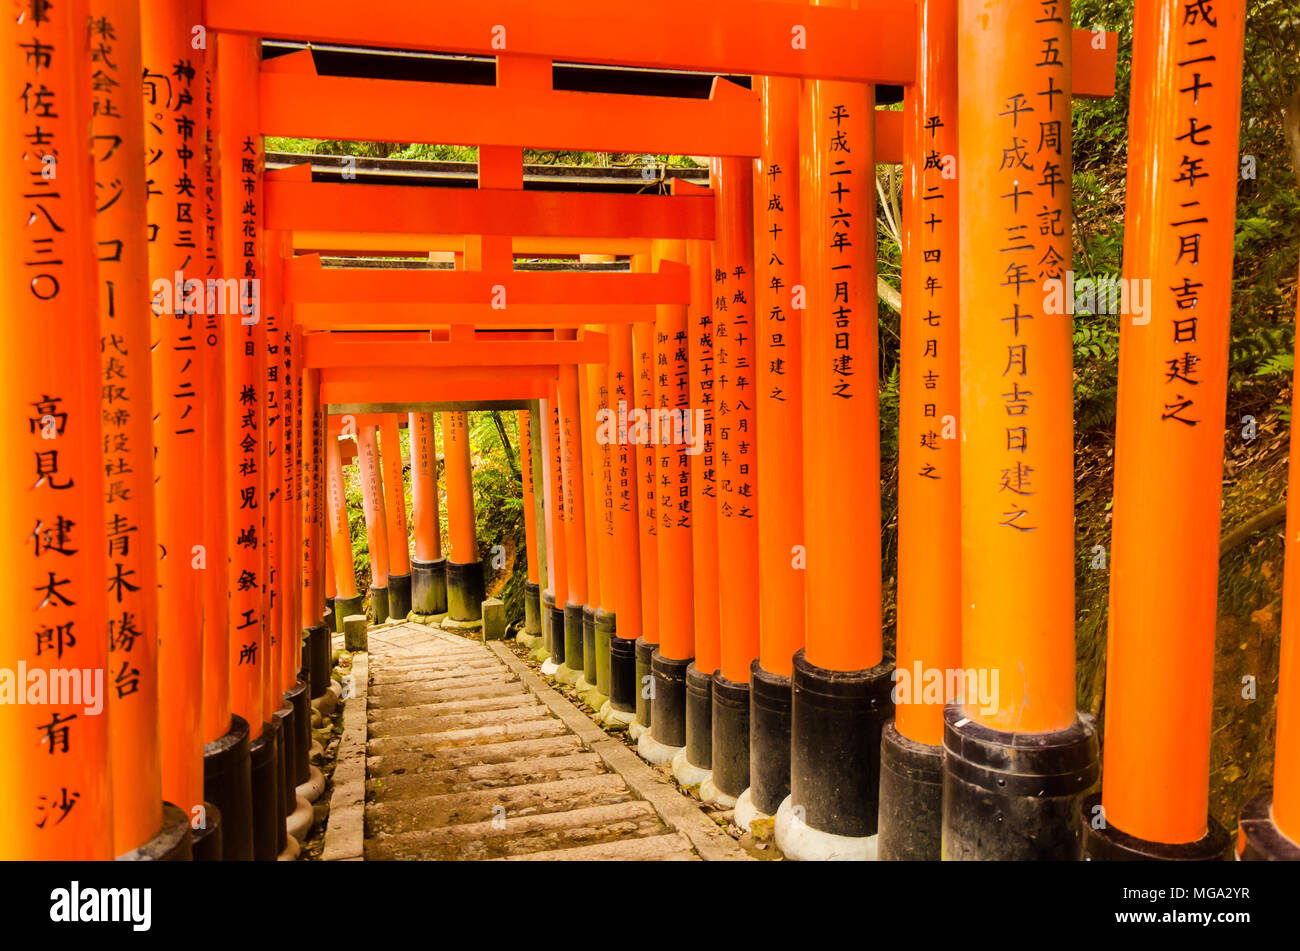 Japanese red wood with japanese kanji characters and letters Stock Photo